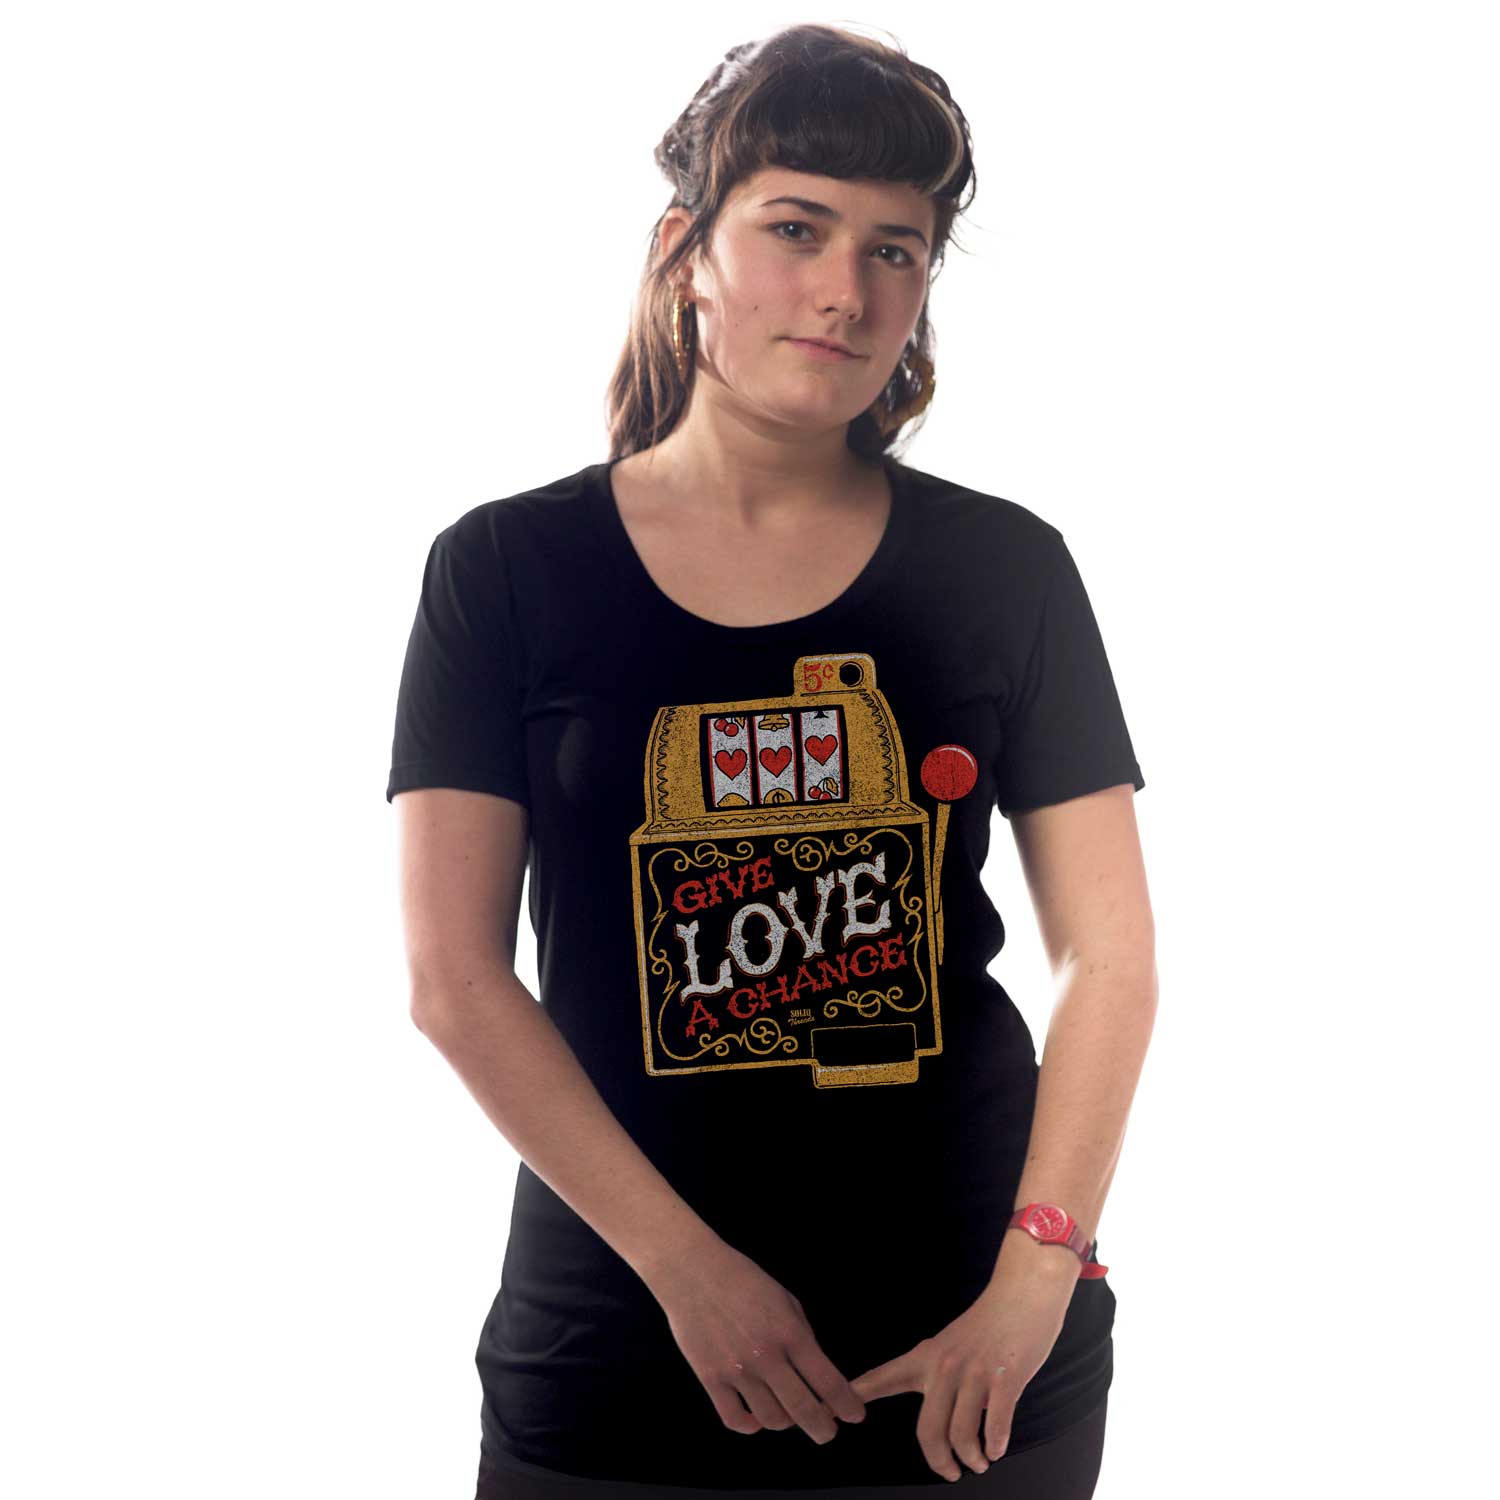 Women's Give Love A Chance Vintage Graphic Tee | Cool Slot Machine T-shirt for Women | Solid Threads